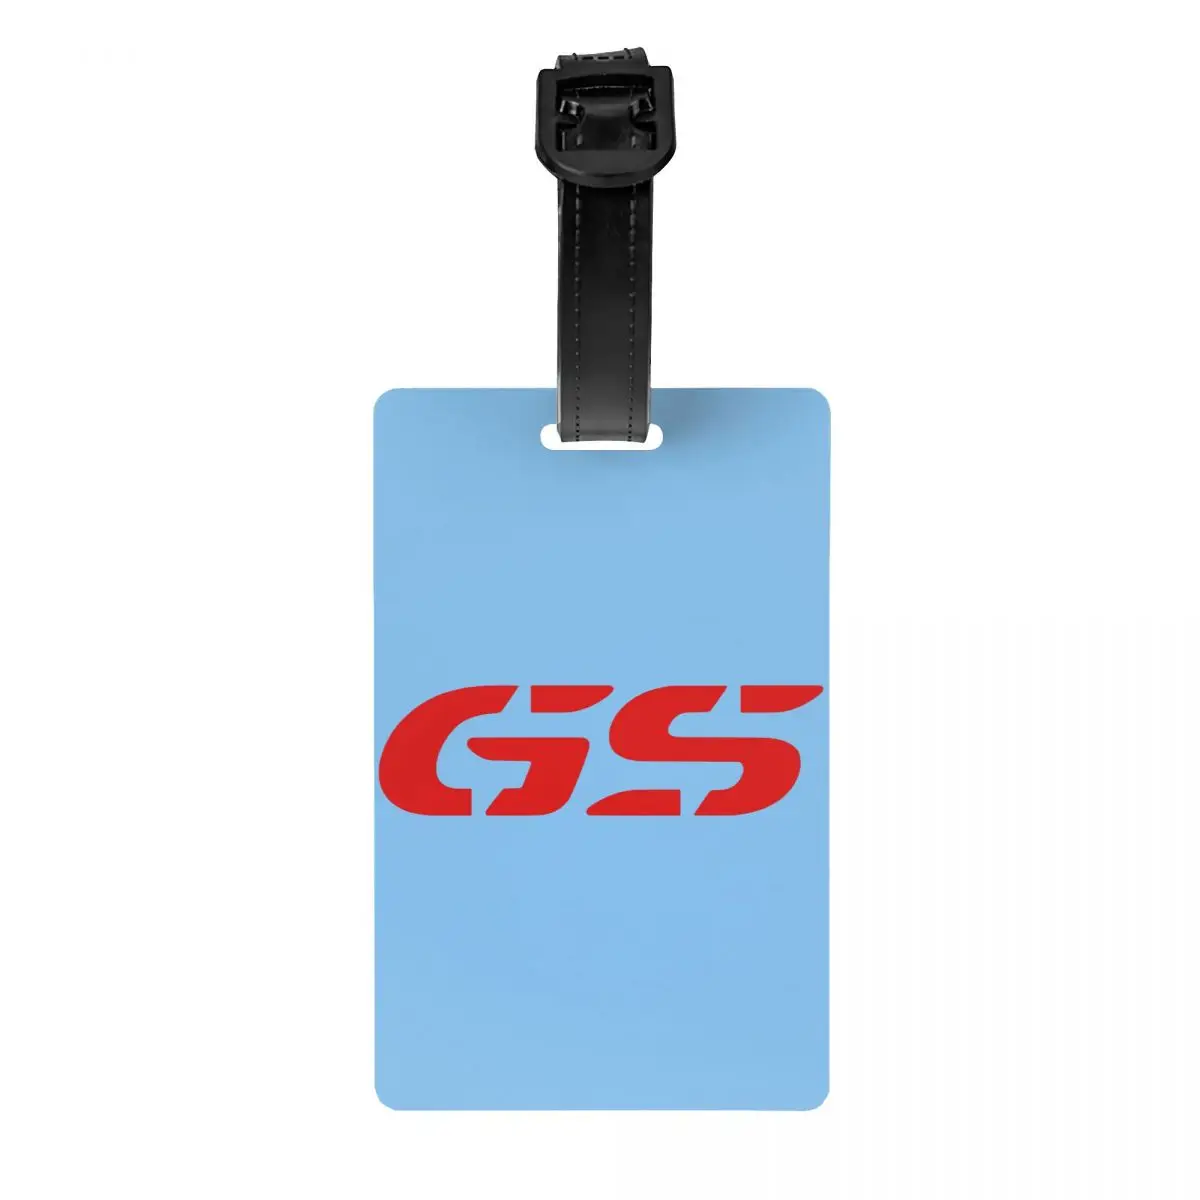 

Motorcycle Adventure R1200 GS Luggage Tags for Travel Suitcase Motorrad Biker Privacy Cover Name ID Card